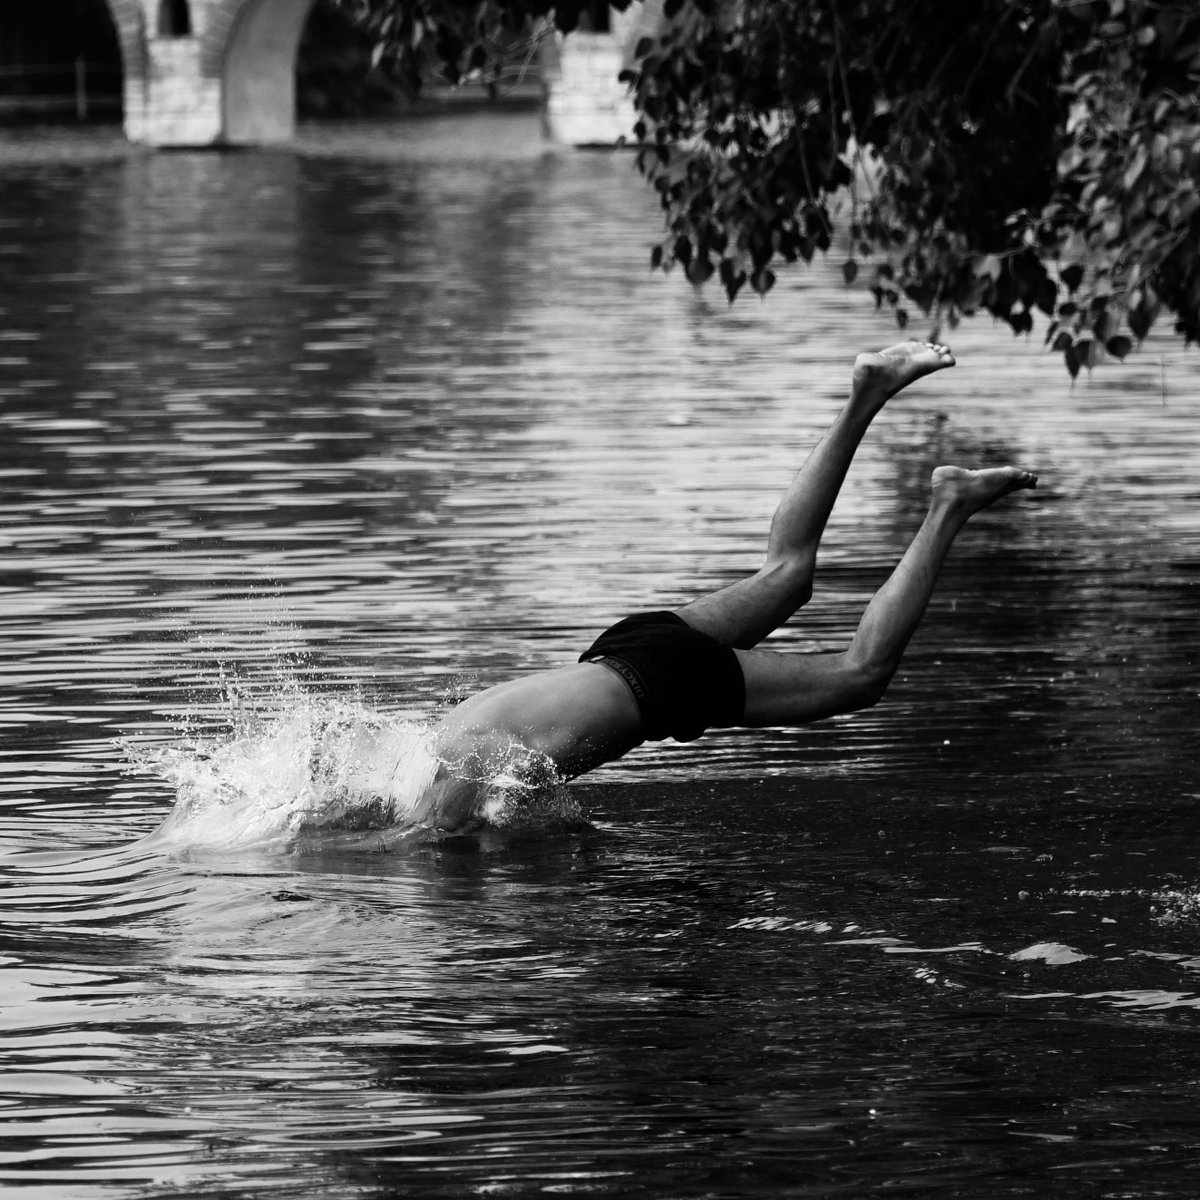 brainwashed;
diving in the lake.

#dive #blackandwhitephotography #mananchrome #abstract #photography #travel #spicollective #streetphotography